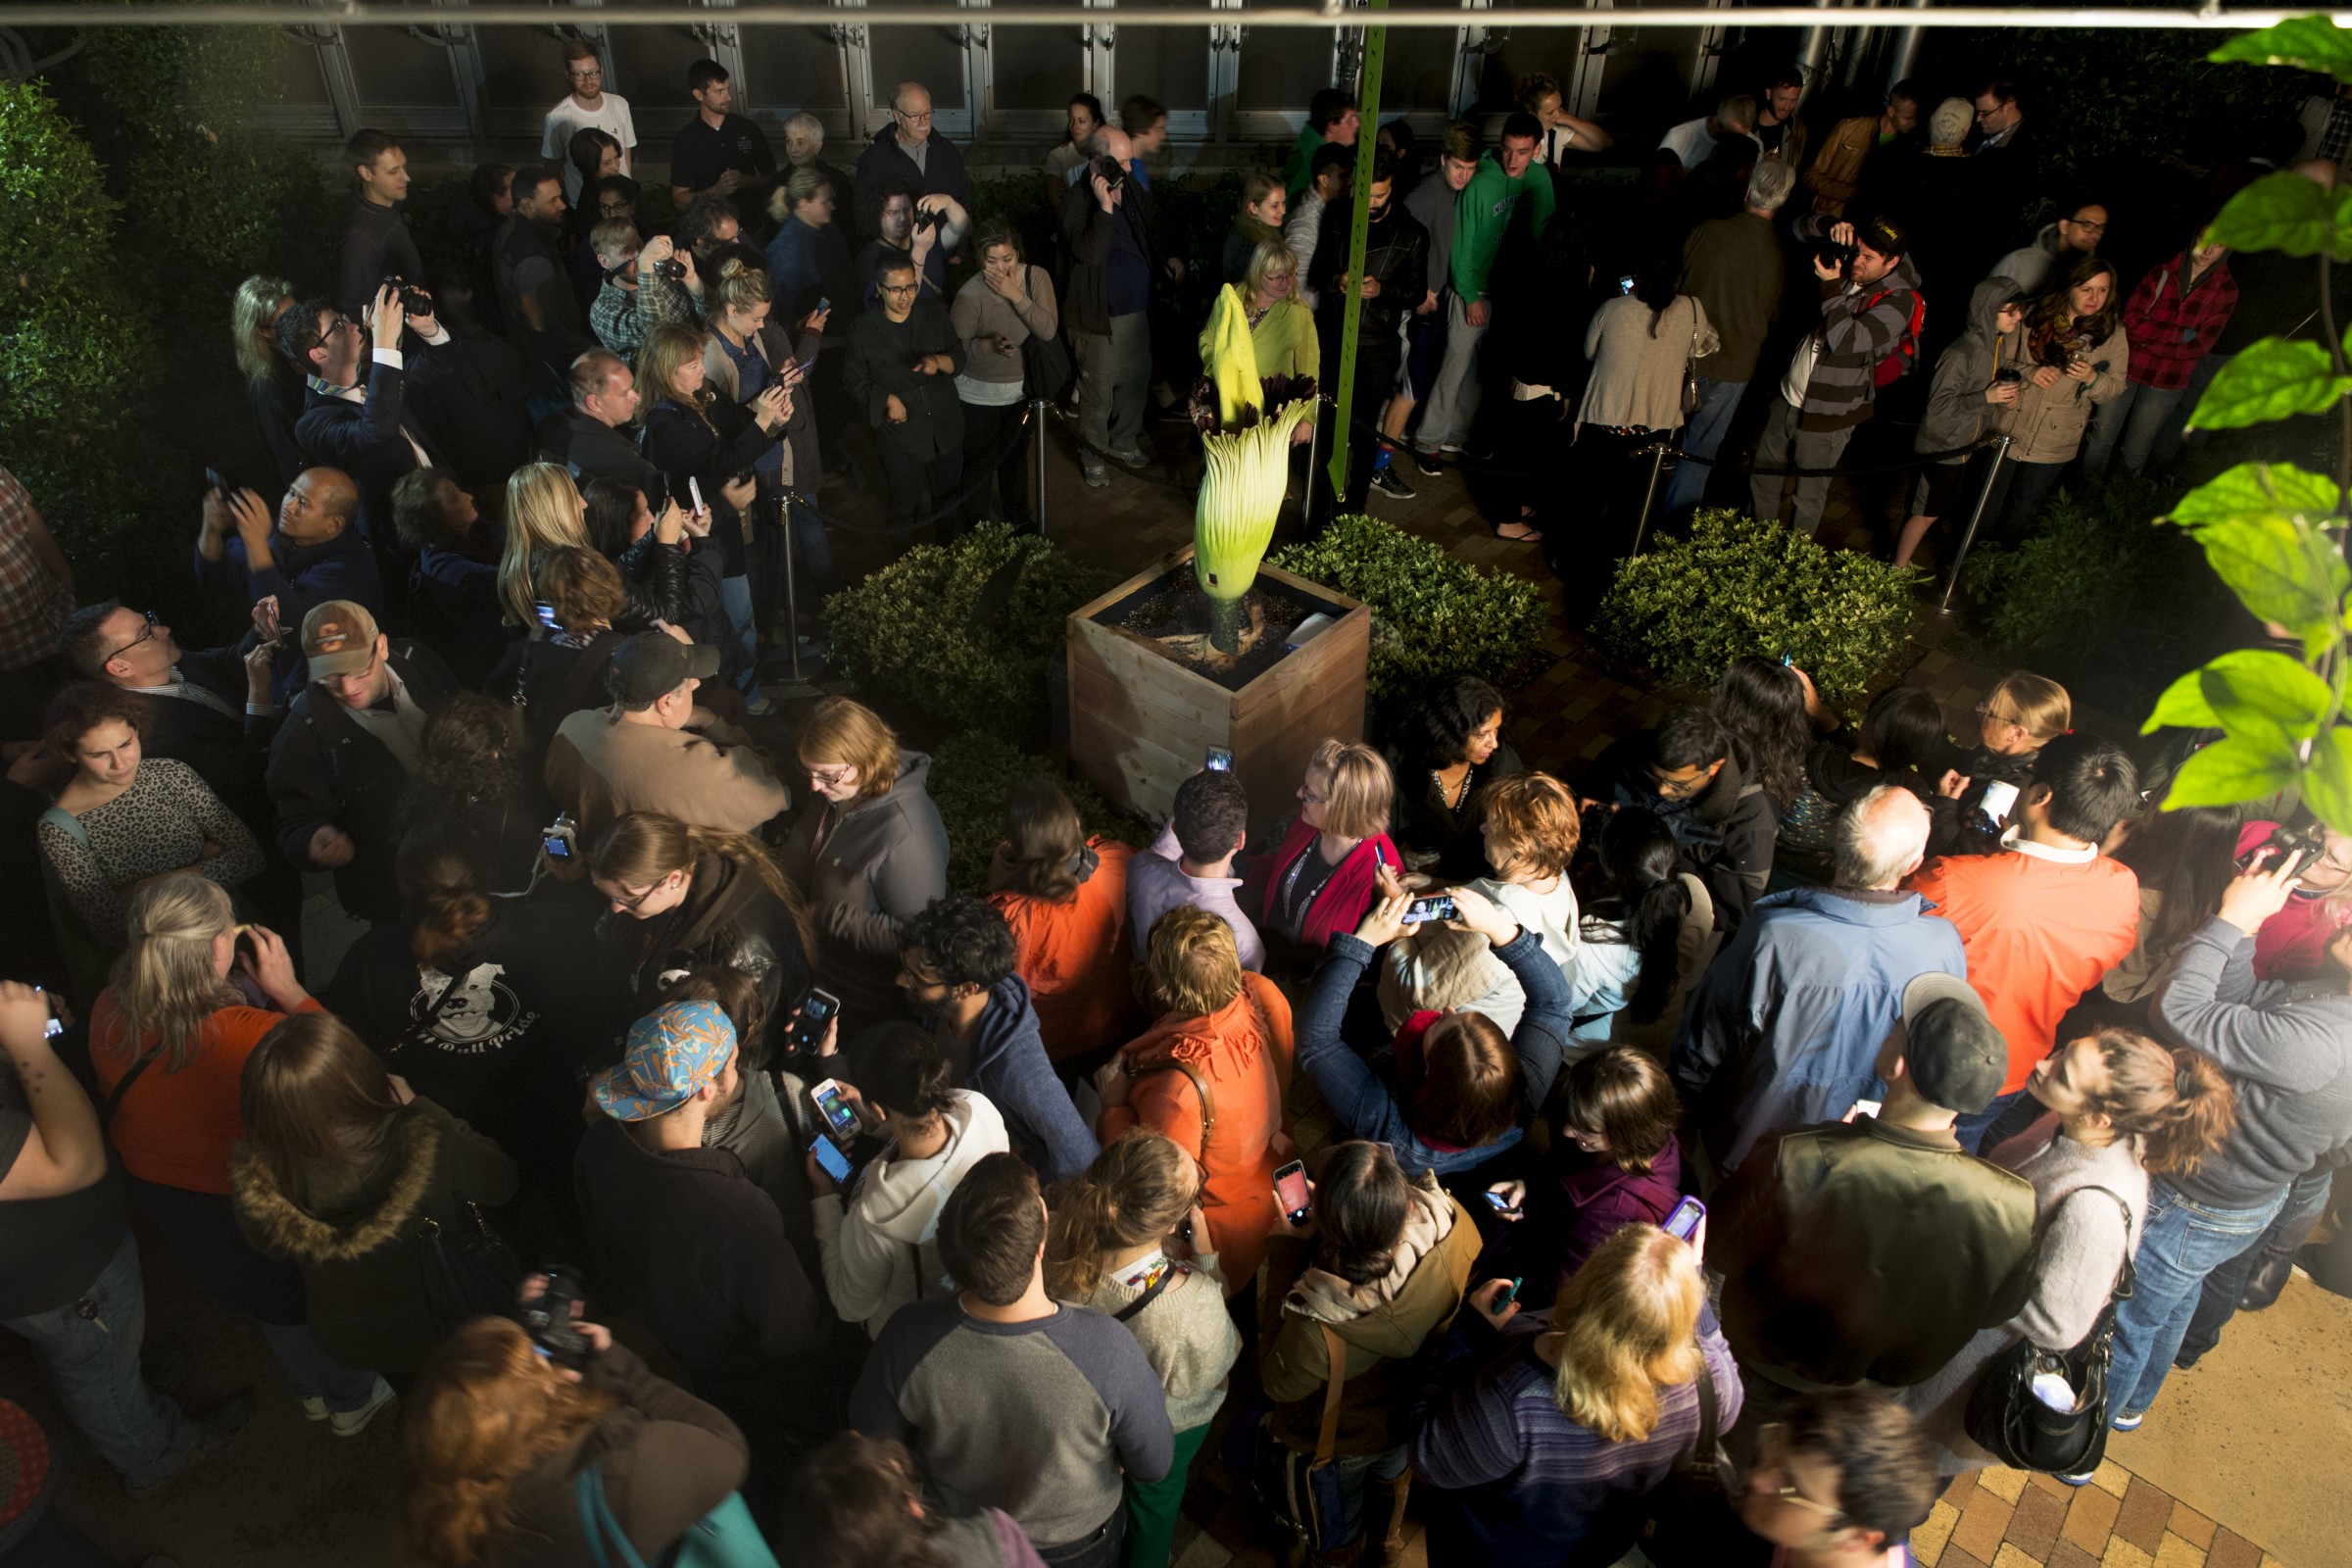 PHOTO: The crowd visiting Alice the Amorphophallus, nearing 1 a.m.